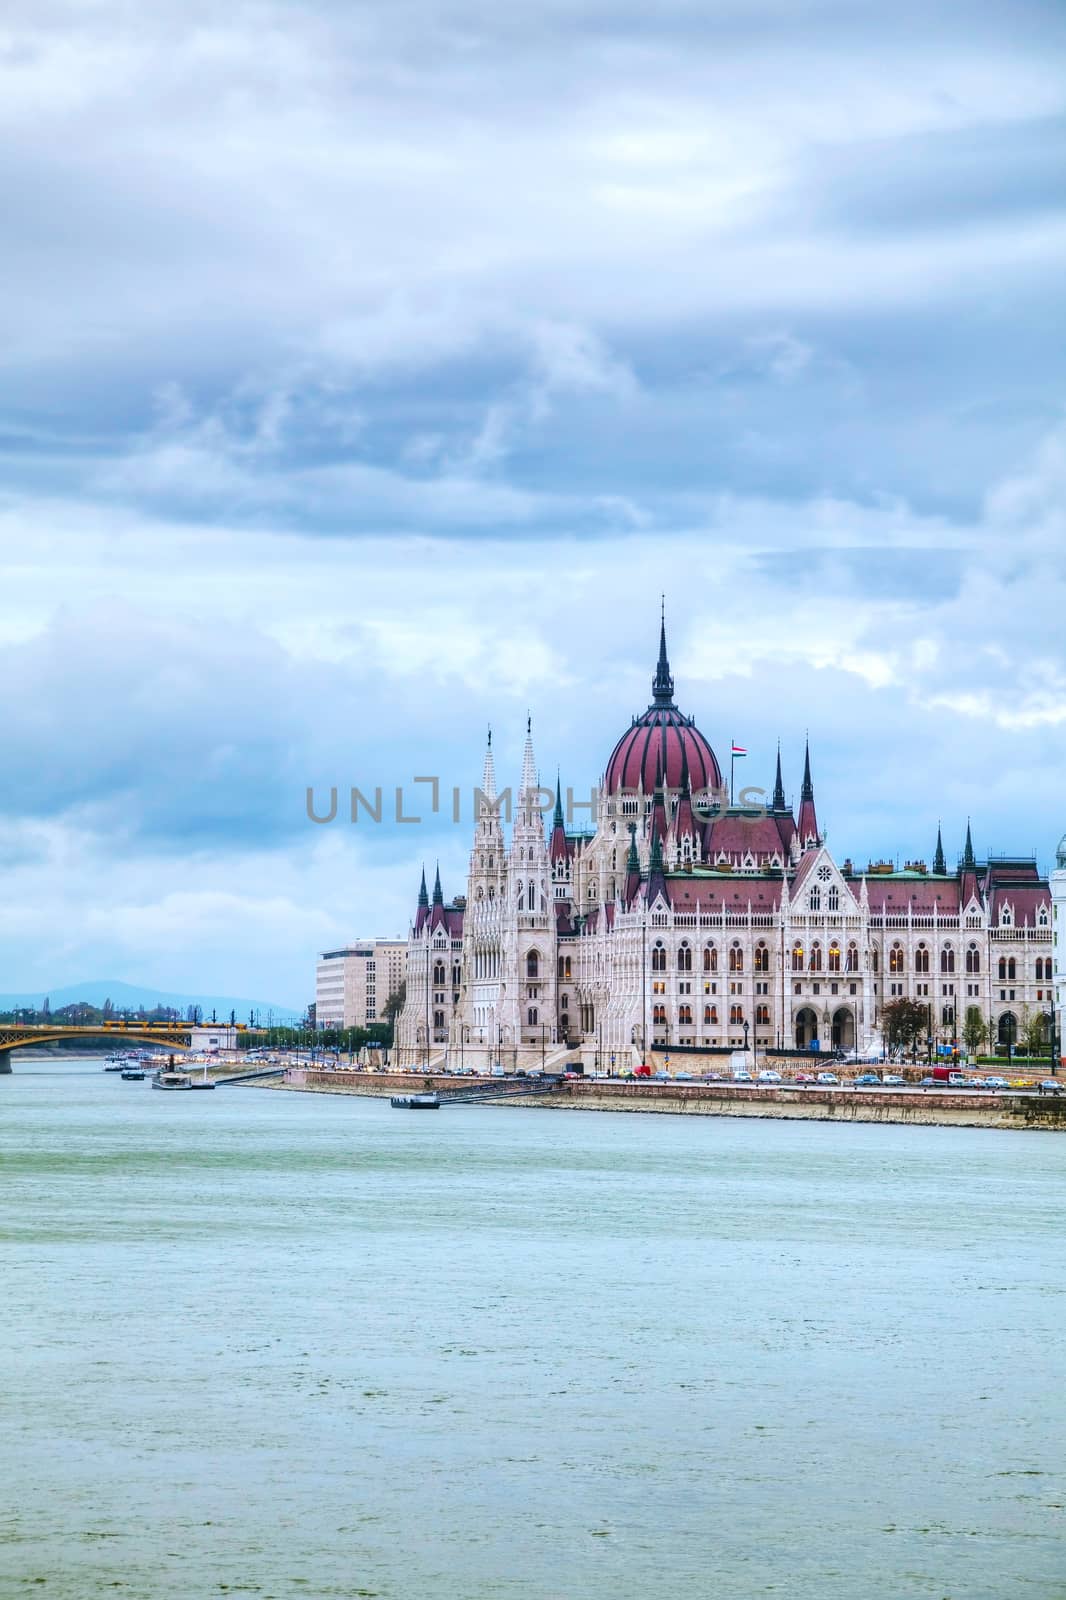 Parliament building in Budapest, Hungary on a cloudy day